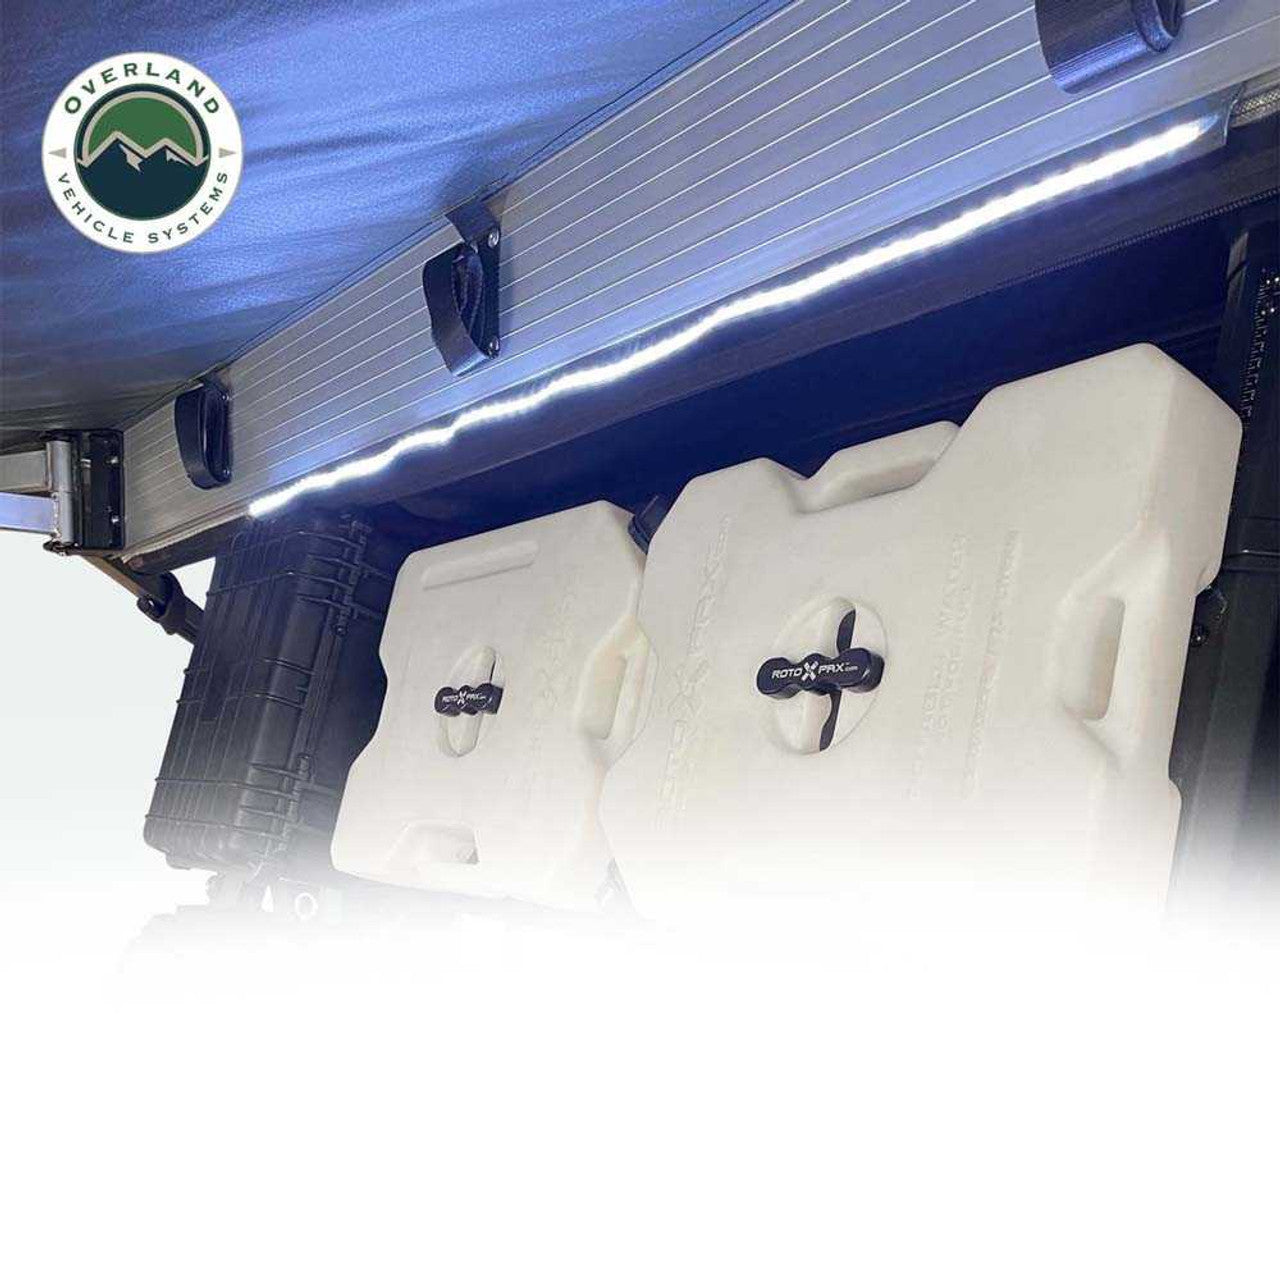 47" LED Light Kit for Roof Top Tent and Awning Flexible | Overland Vehicle Systems